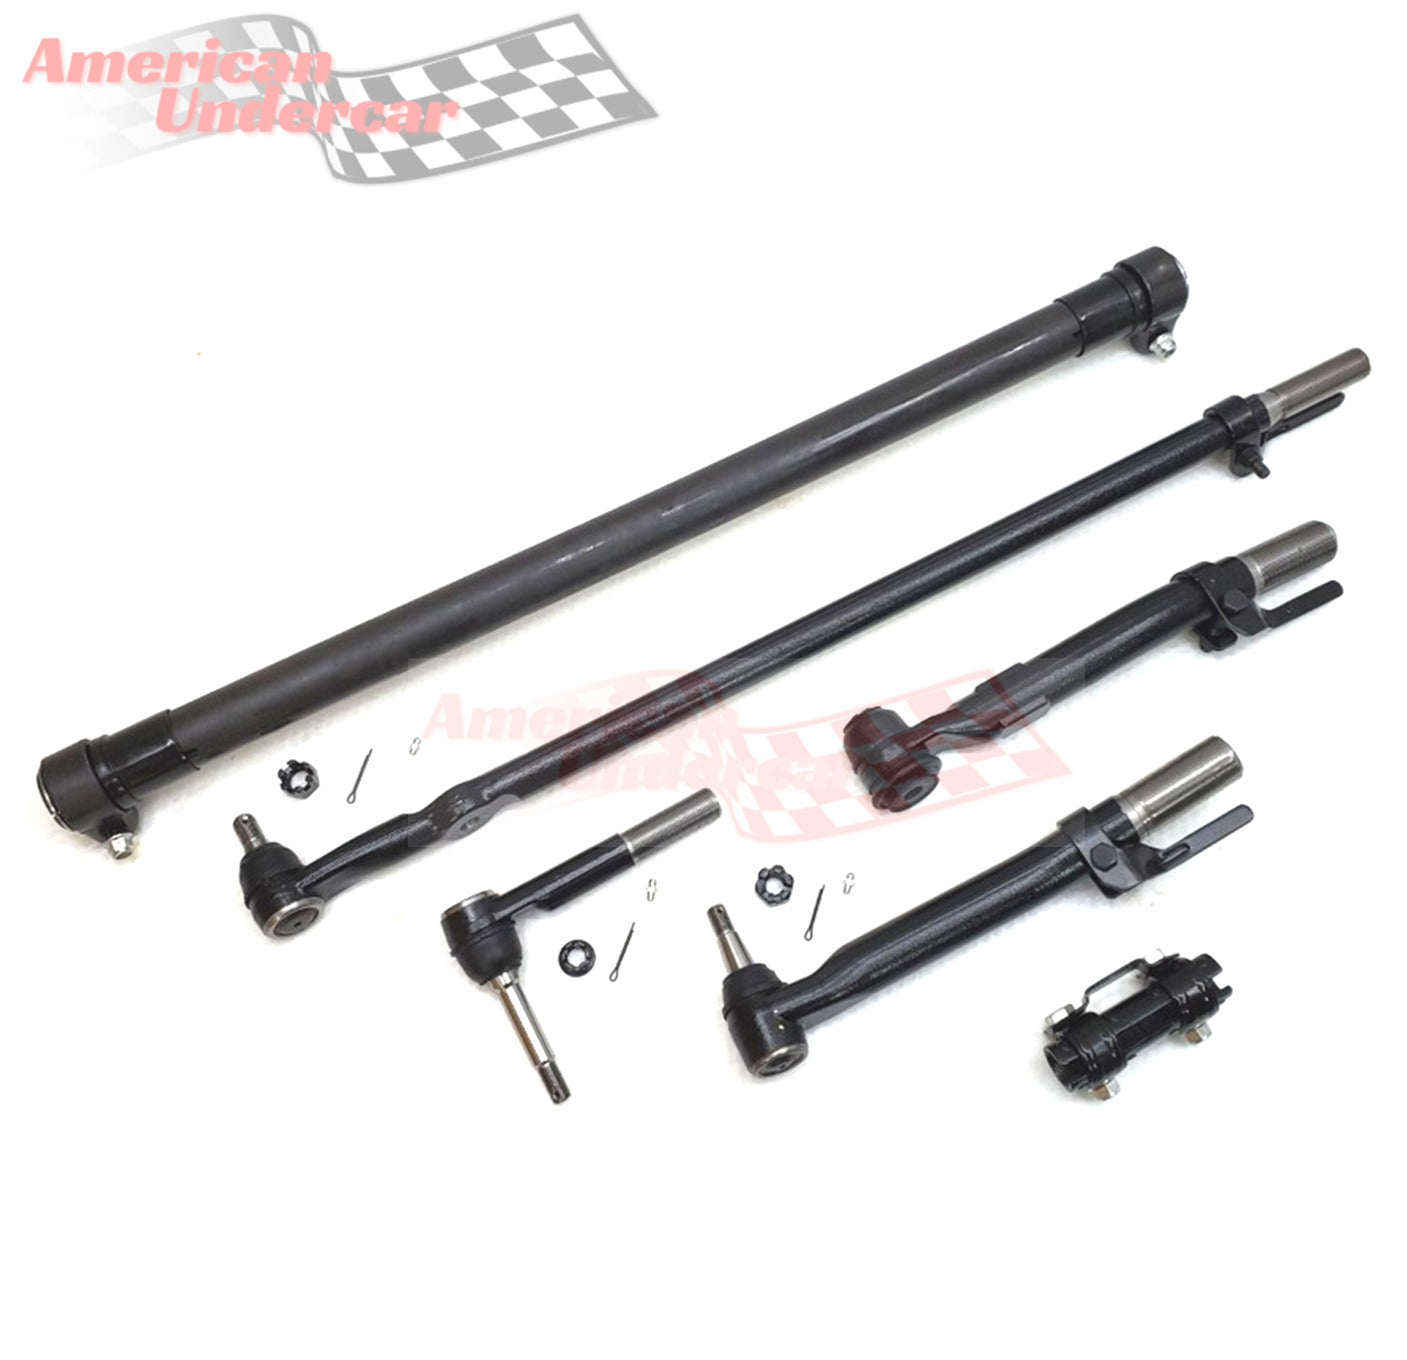 XRF Ford F350 Super Duty Tie Rod Steering and Suspension Kit 2005 - 2010 4x4